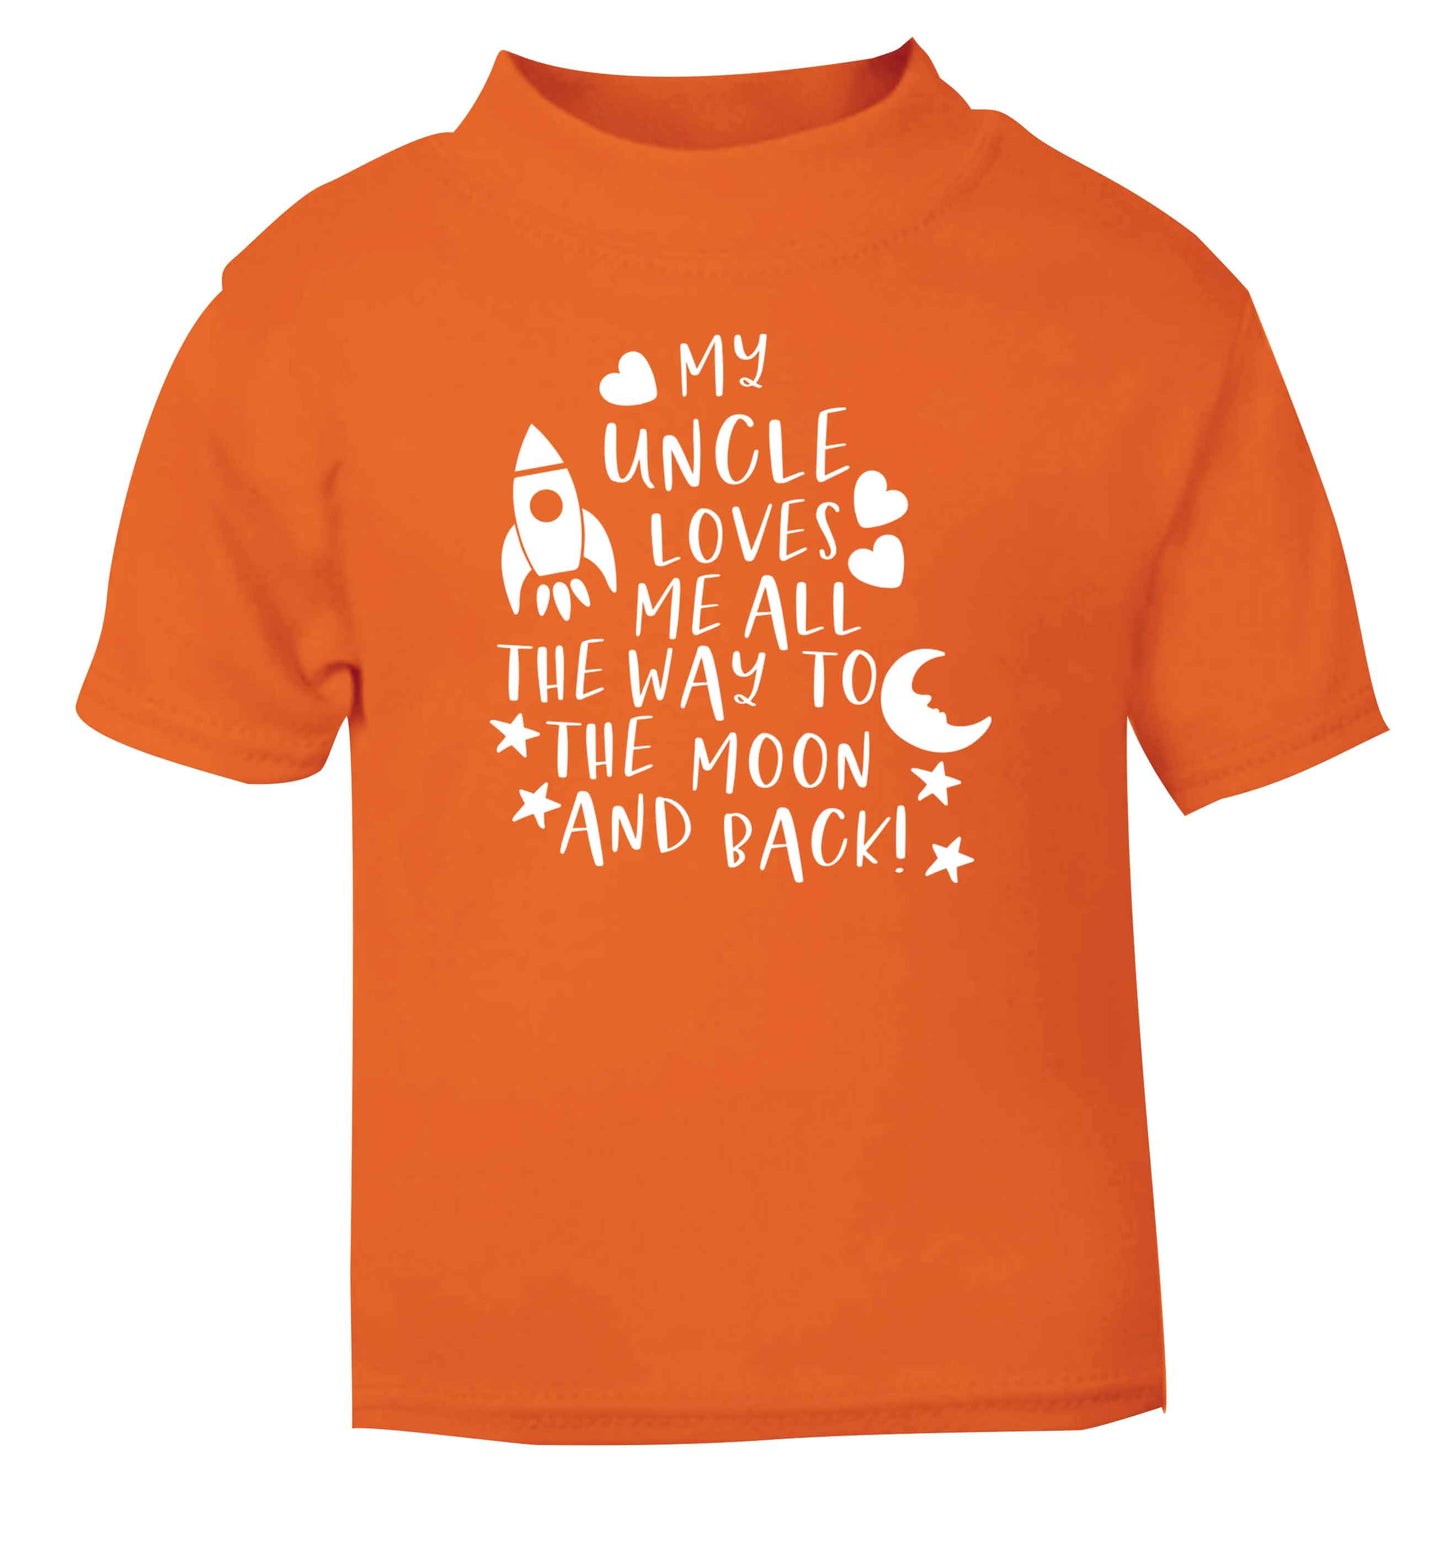 My uncle loves me all the way to the moon and back orange Baby Toddler Tshirt 2 Years